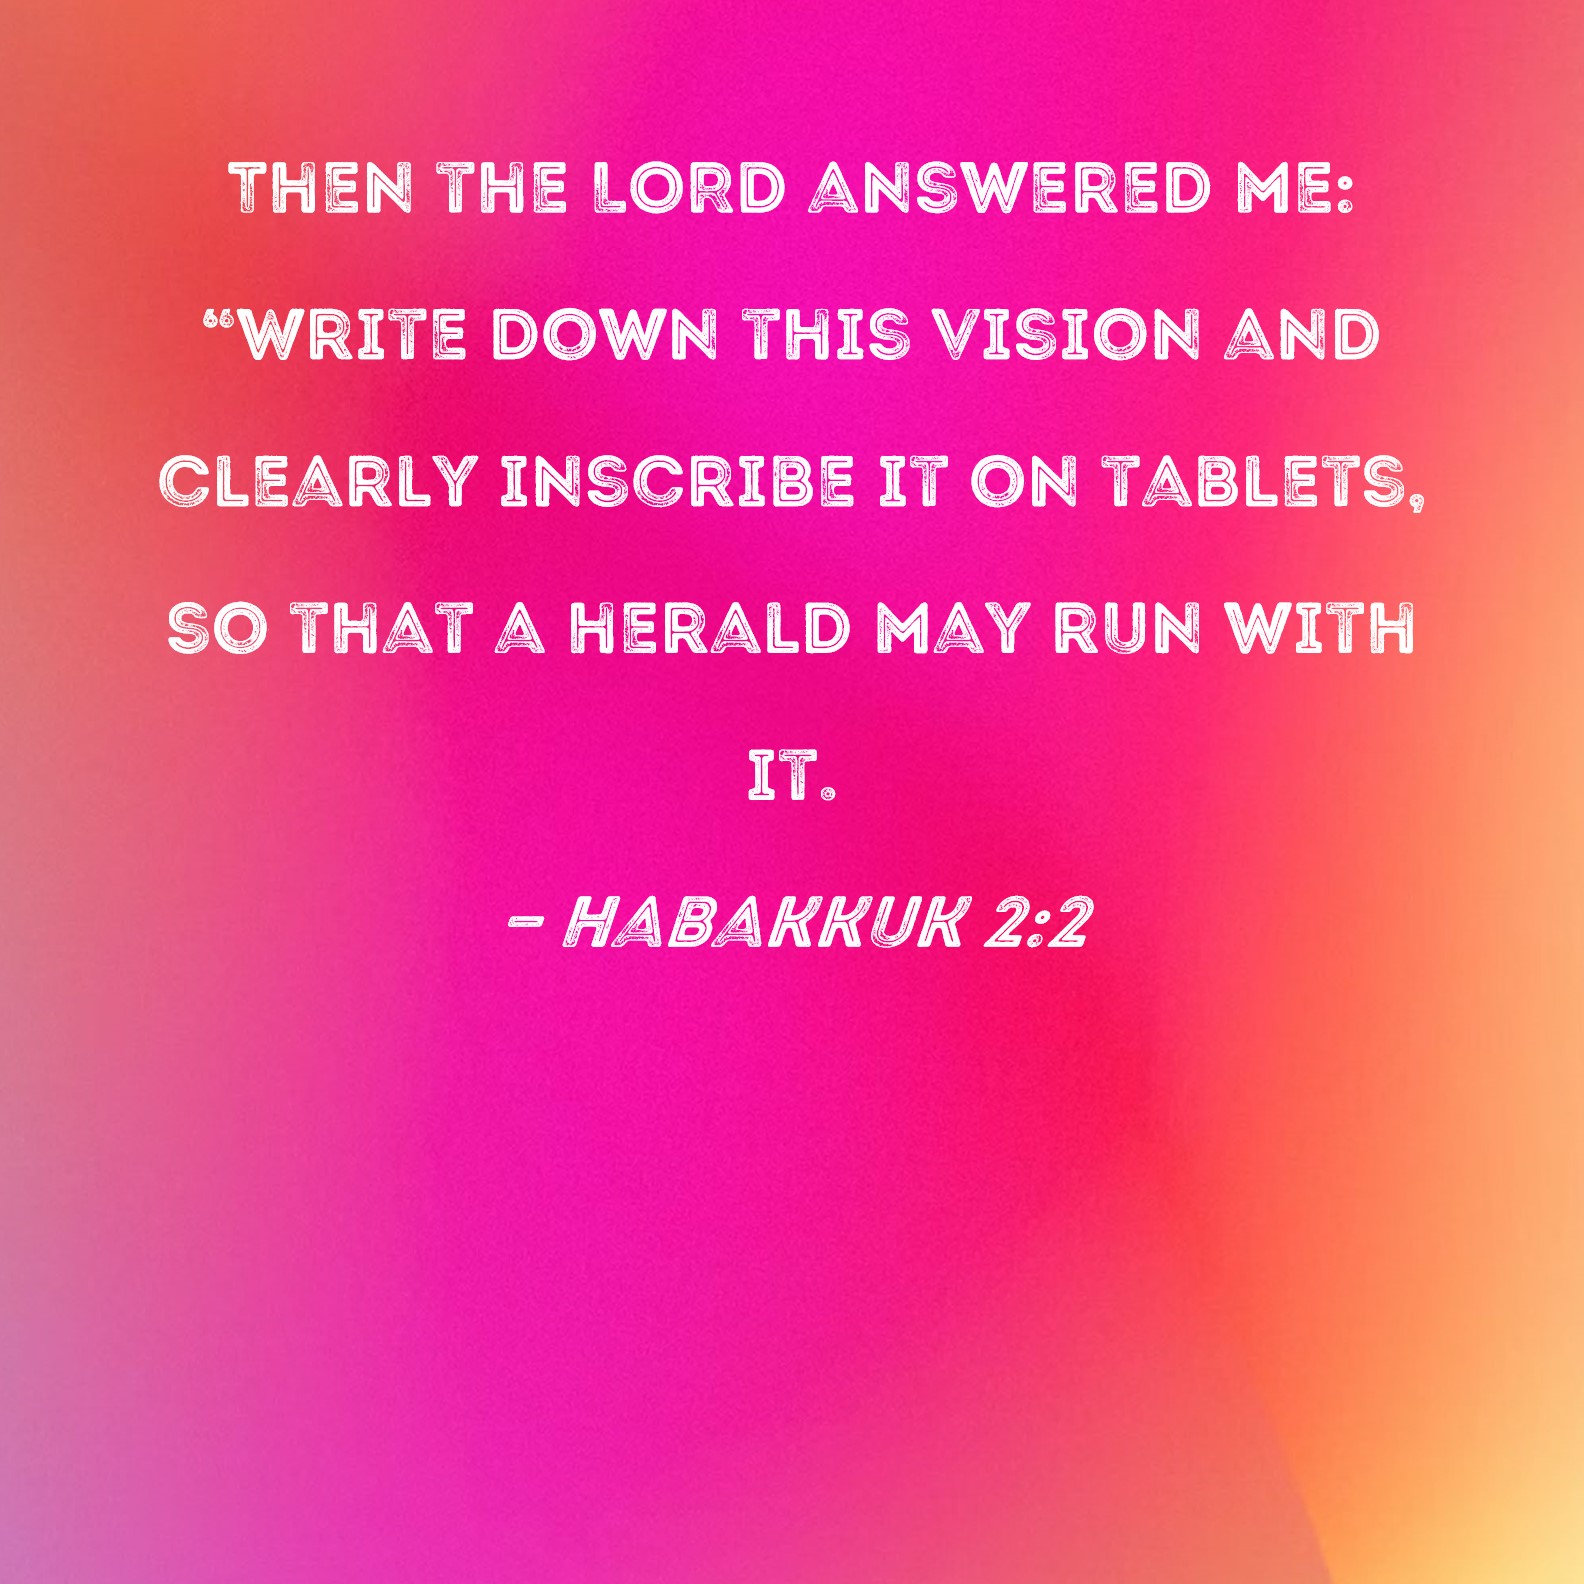 Habakkuk 2:3 For the vision awaits an appointed time; it testifies